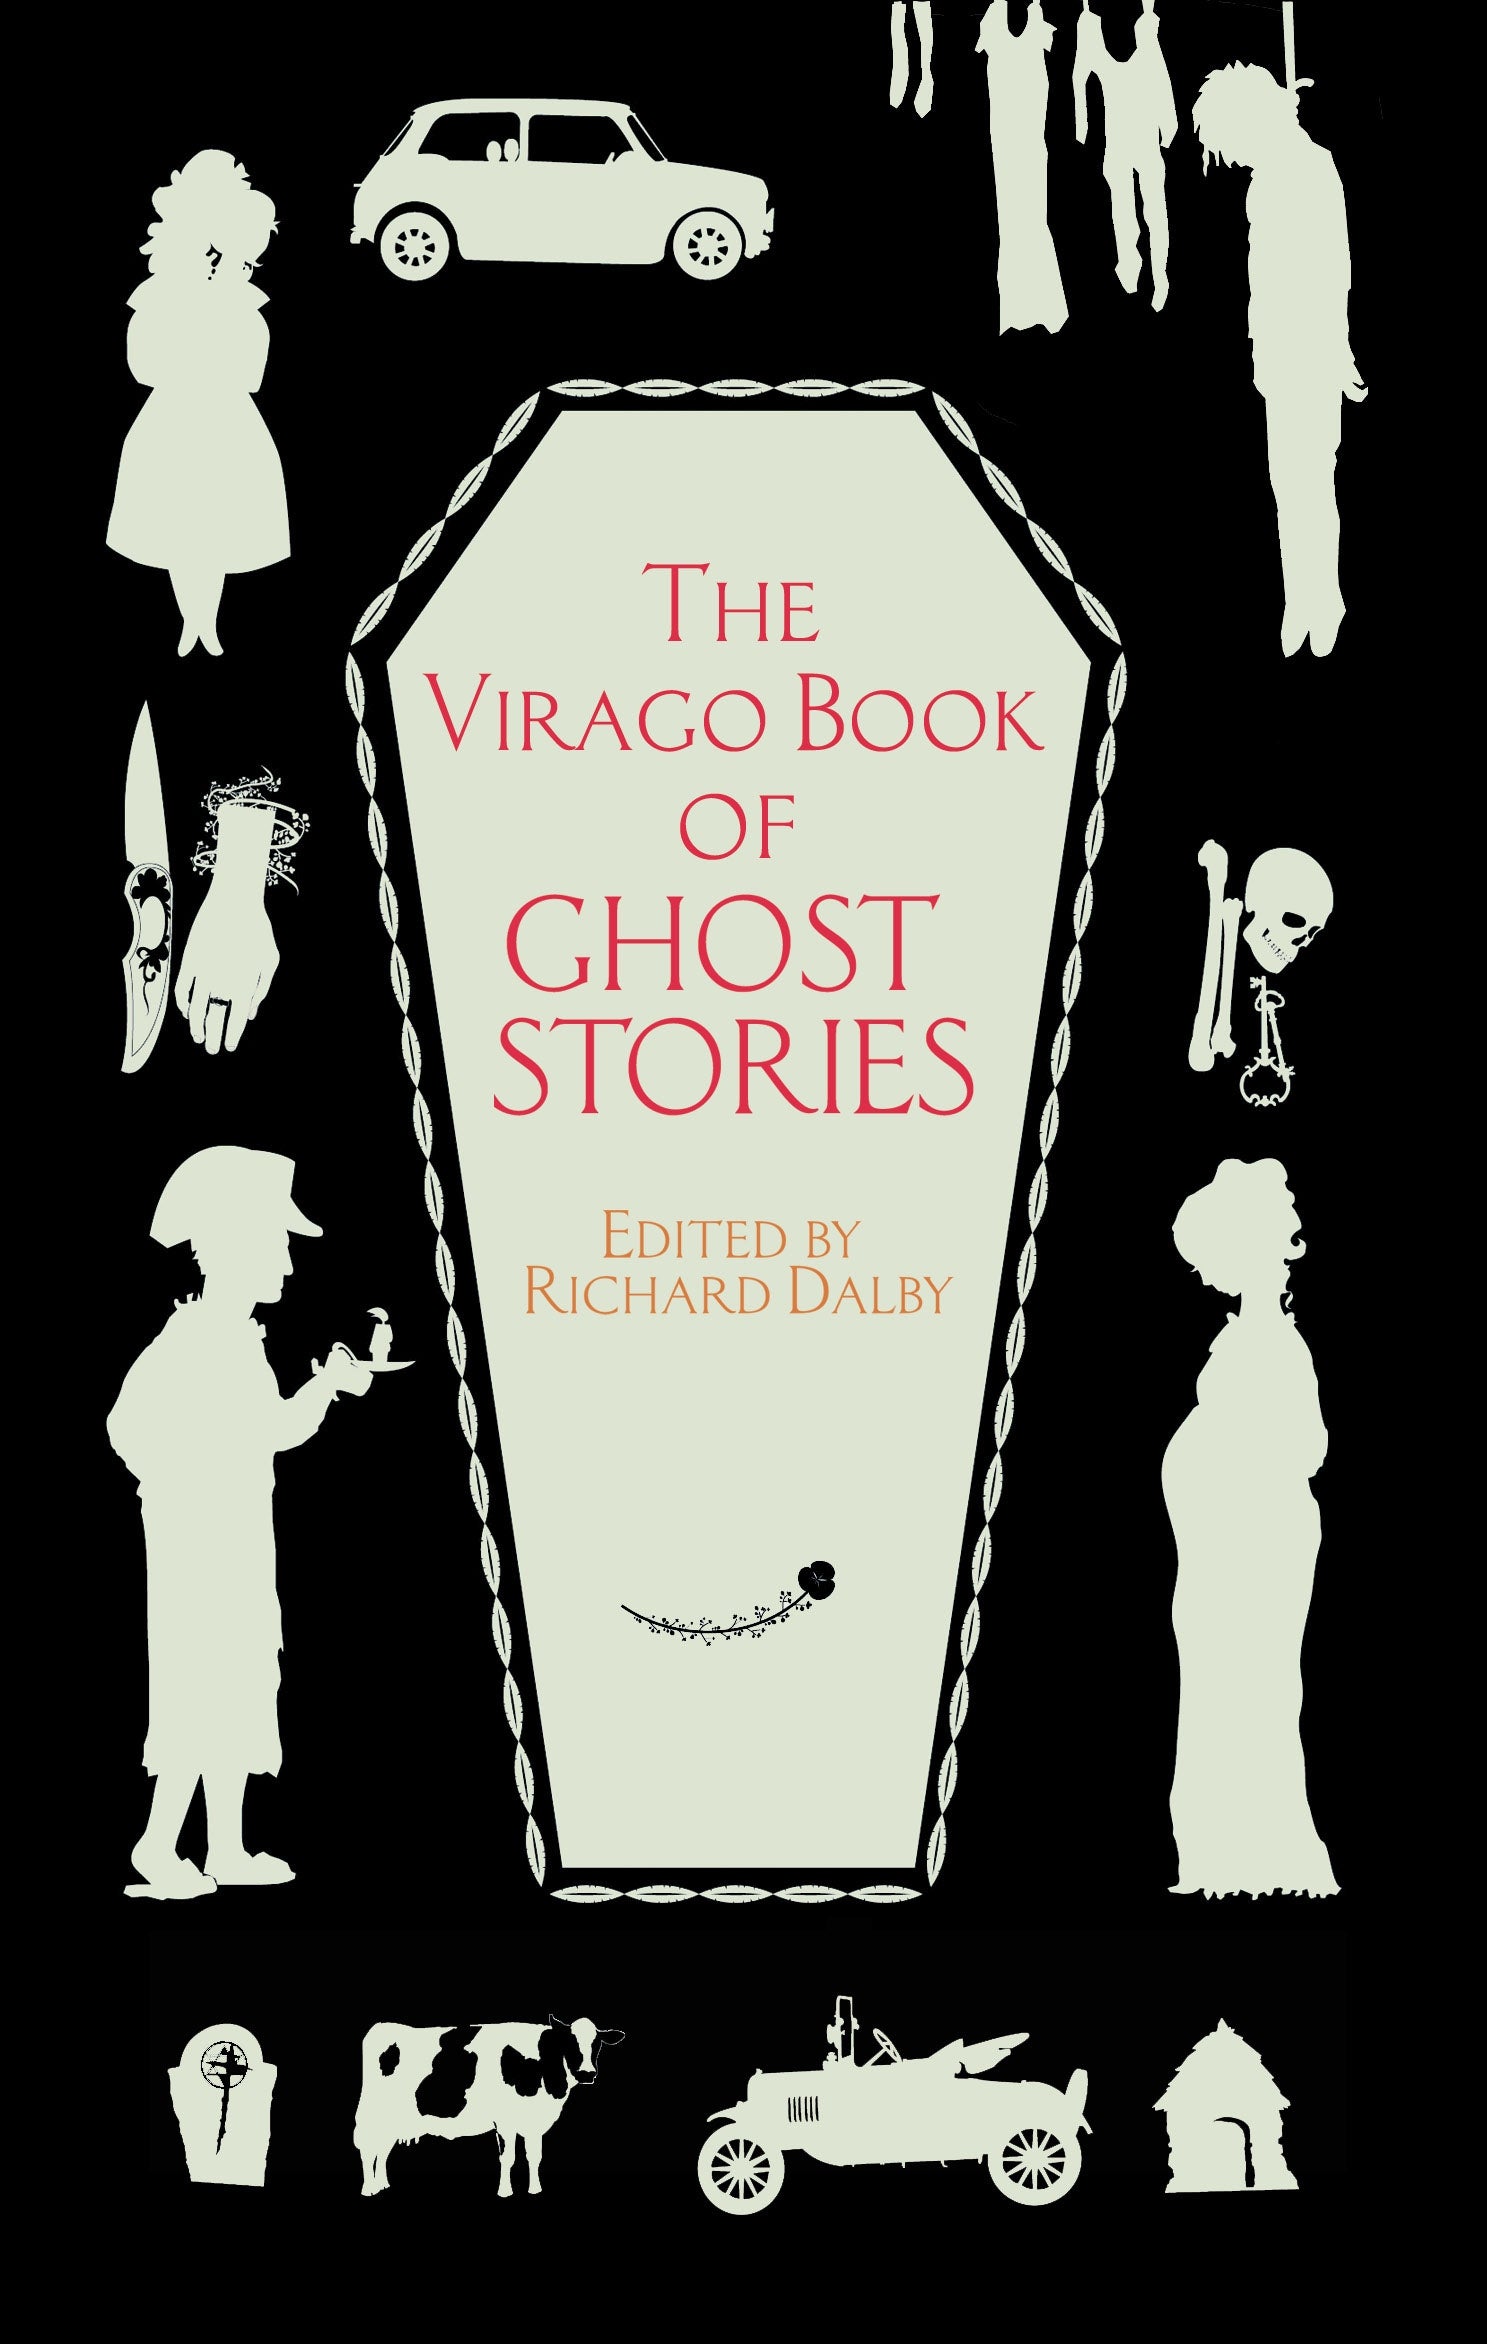 The Virago Book Of Ghost Stories by Richard Dalby